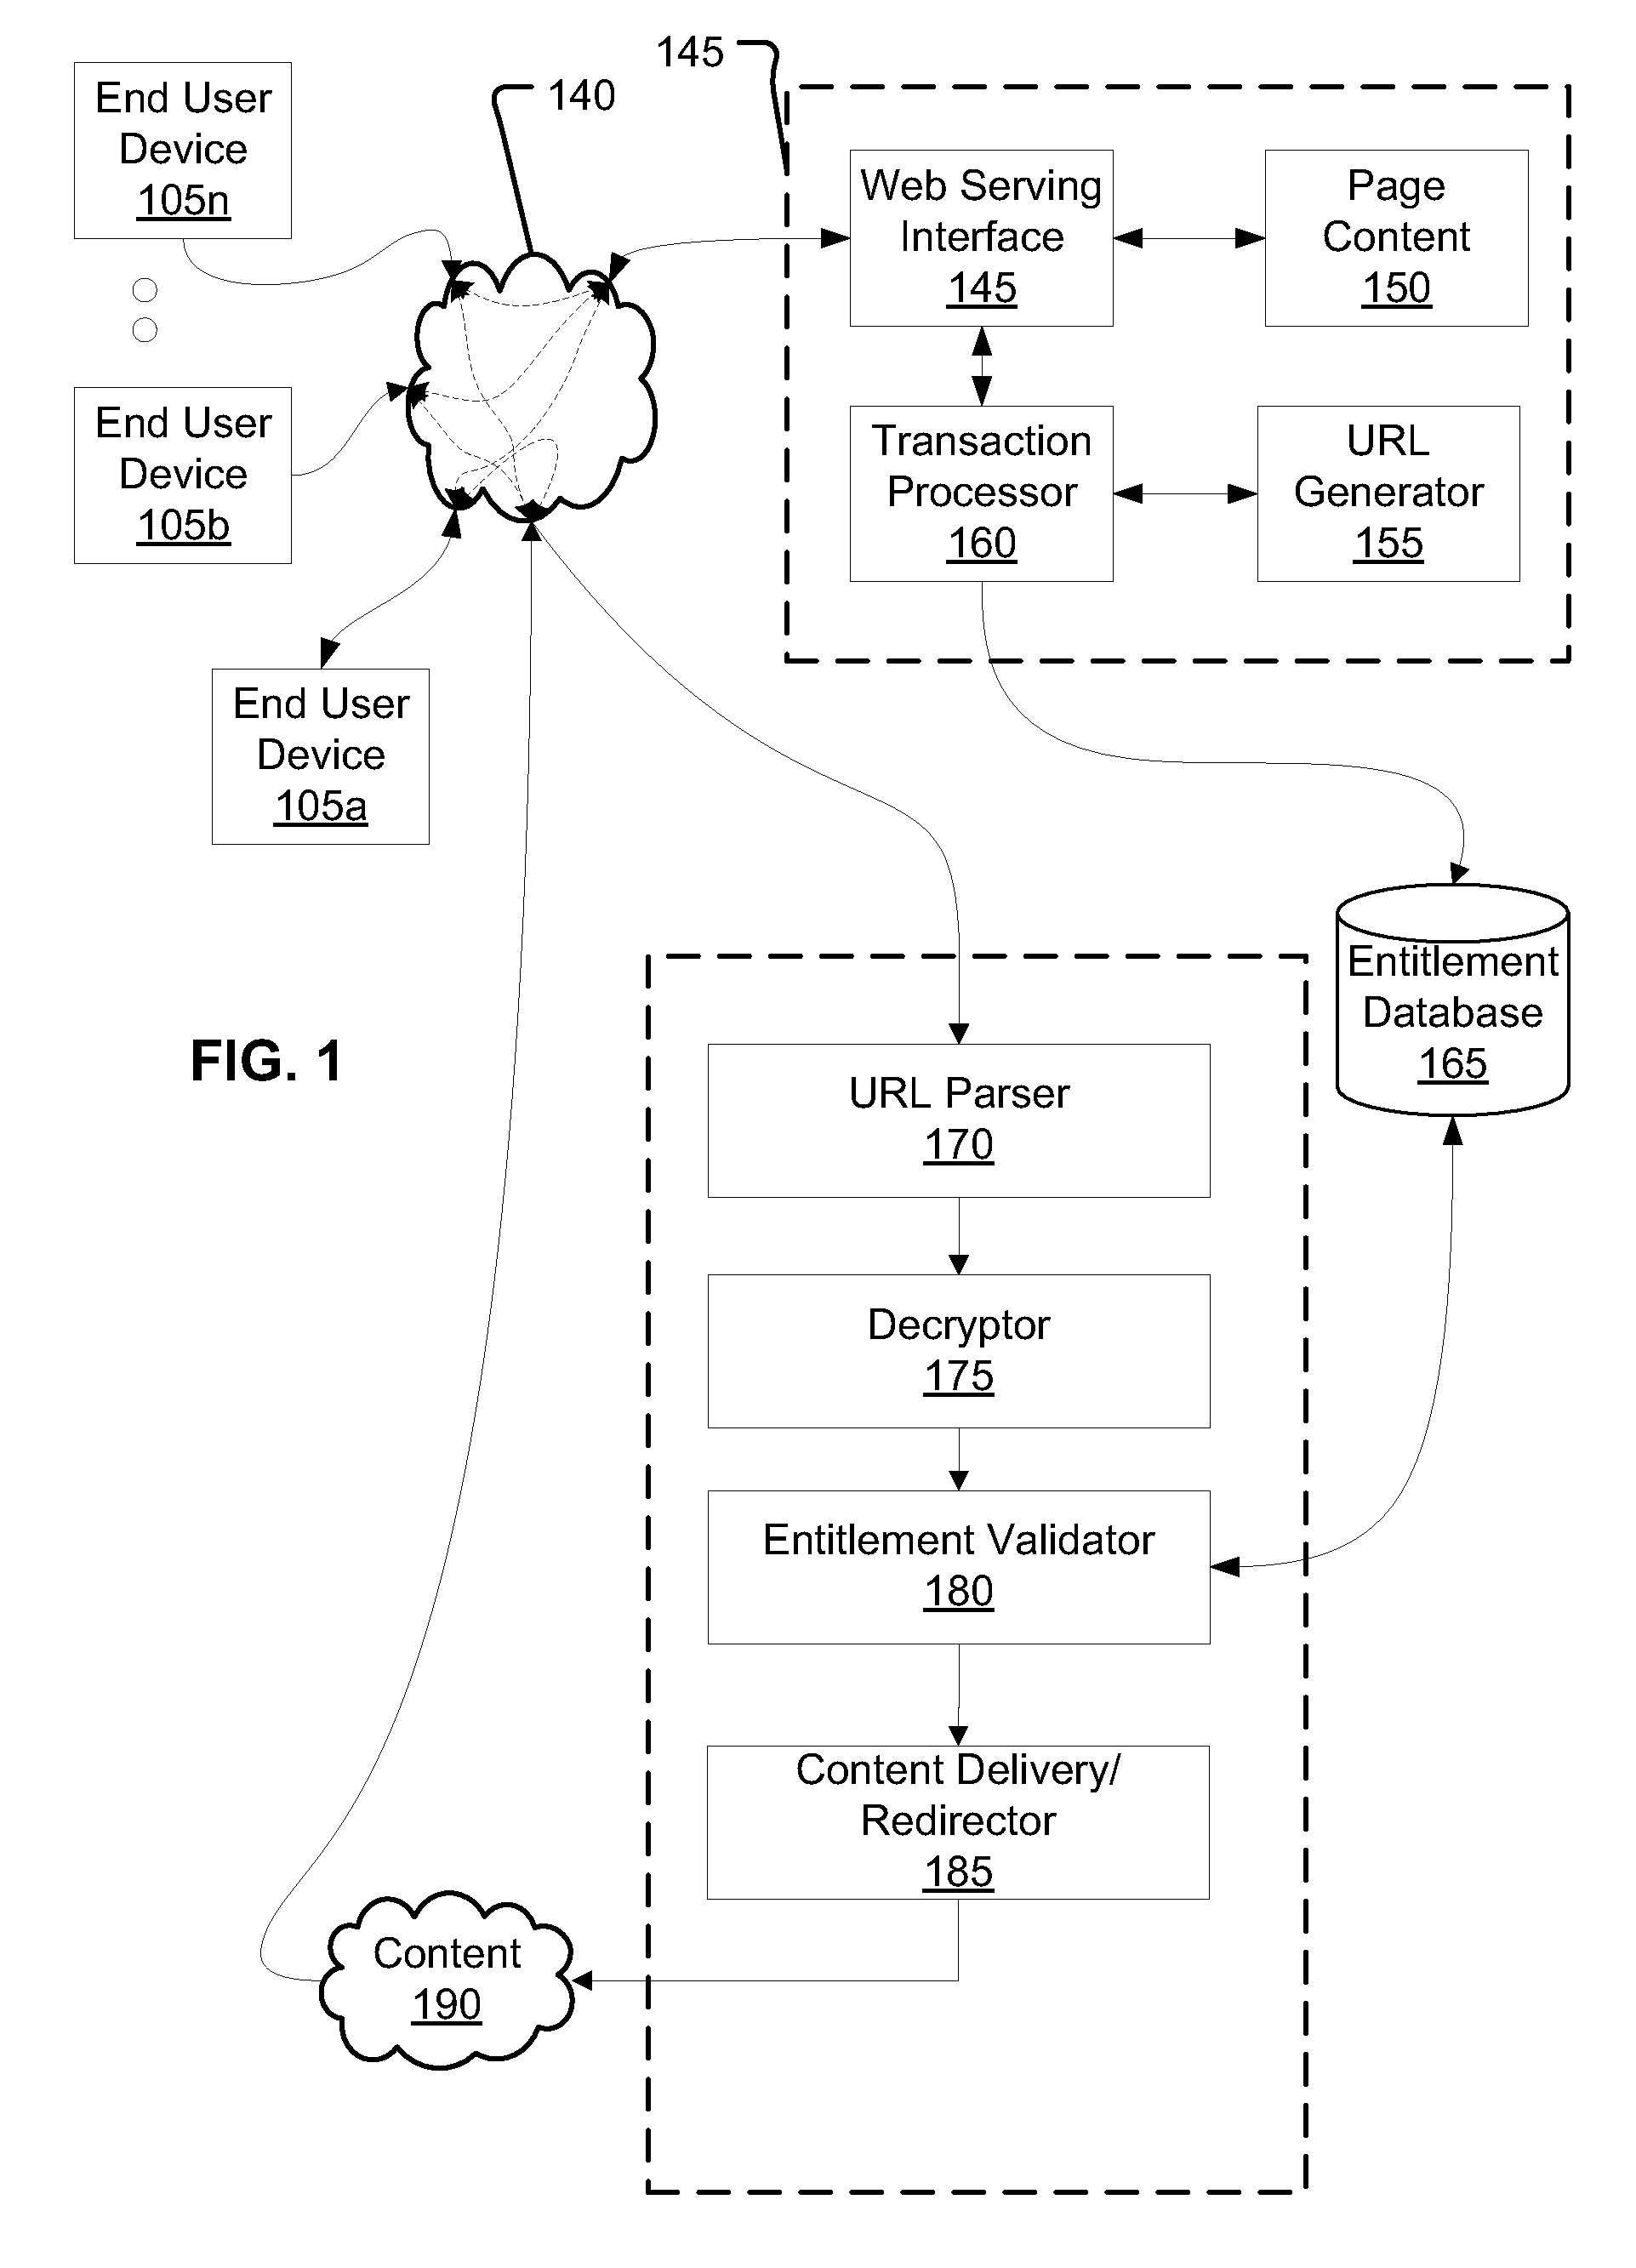 Method and system for verifying entitlement to access content by URL validation